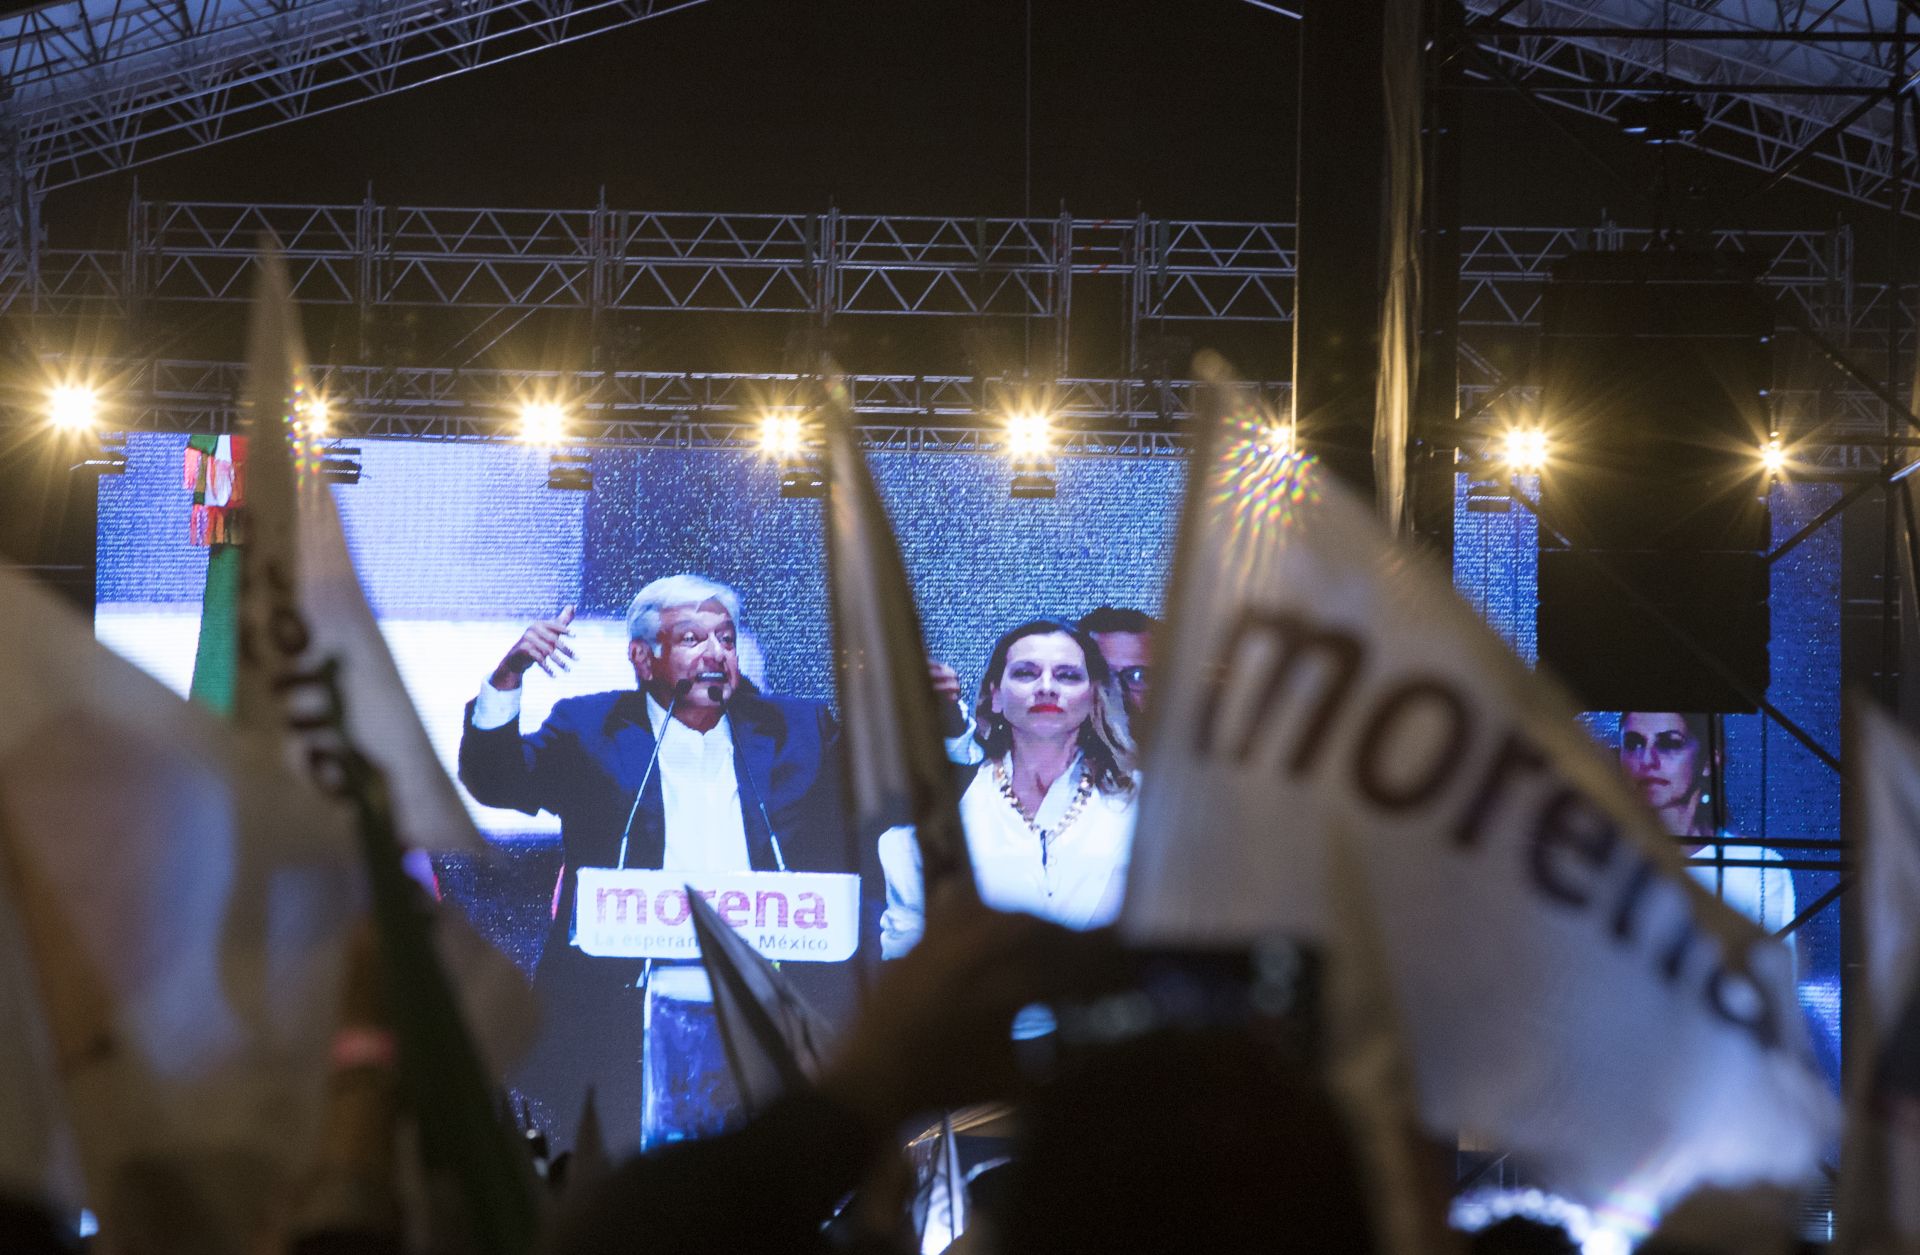 Mexico's new president, Andres Manuel Lopez Obrador, speaks July 1 during a celebration at Zocalo square in Mexico City.